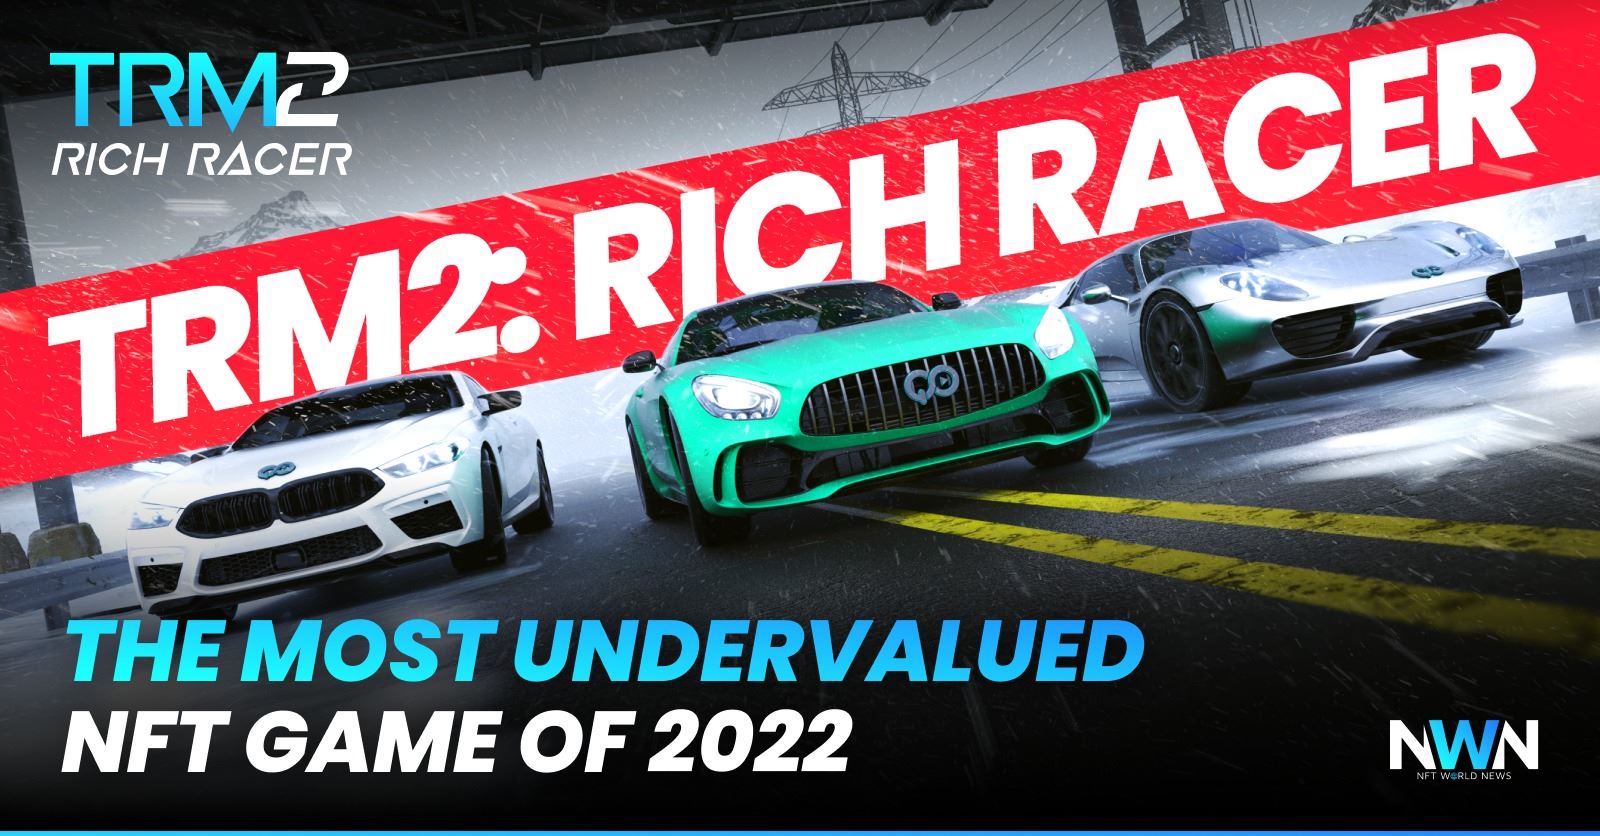 TRM 2 Is The Most Undervalued NFT Game Of 2022